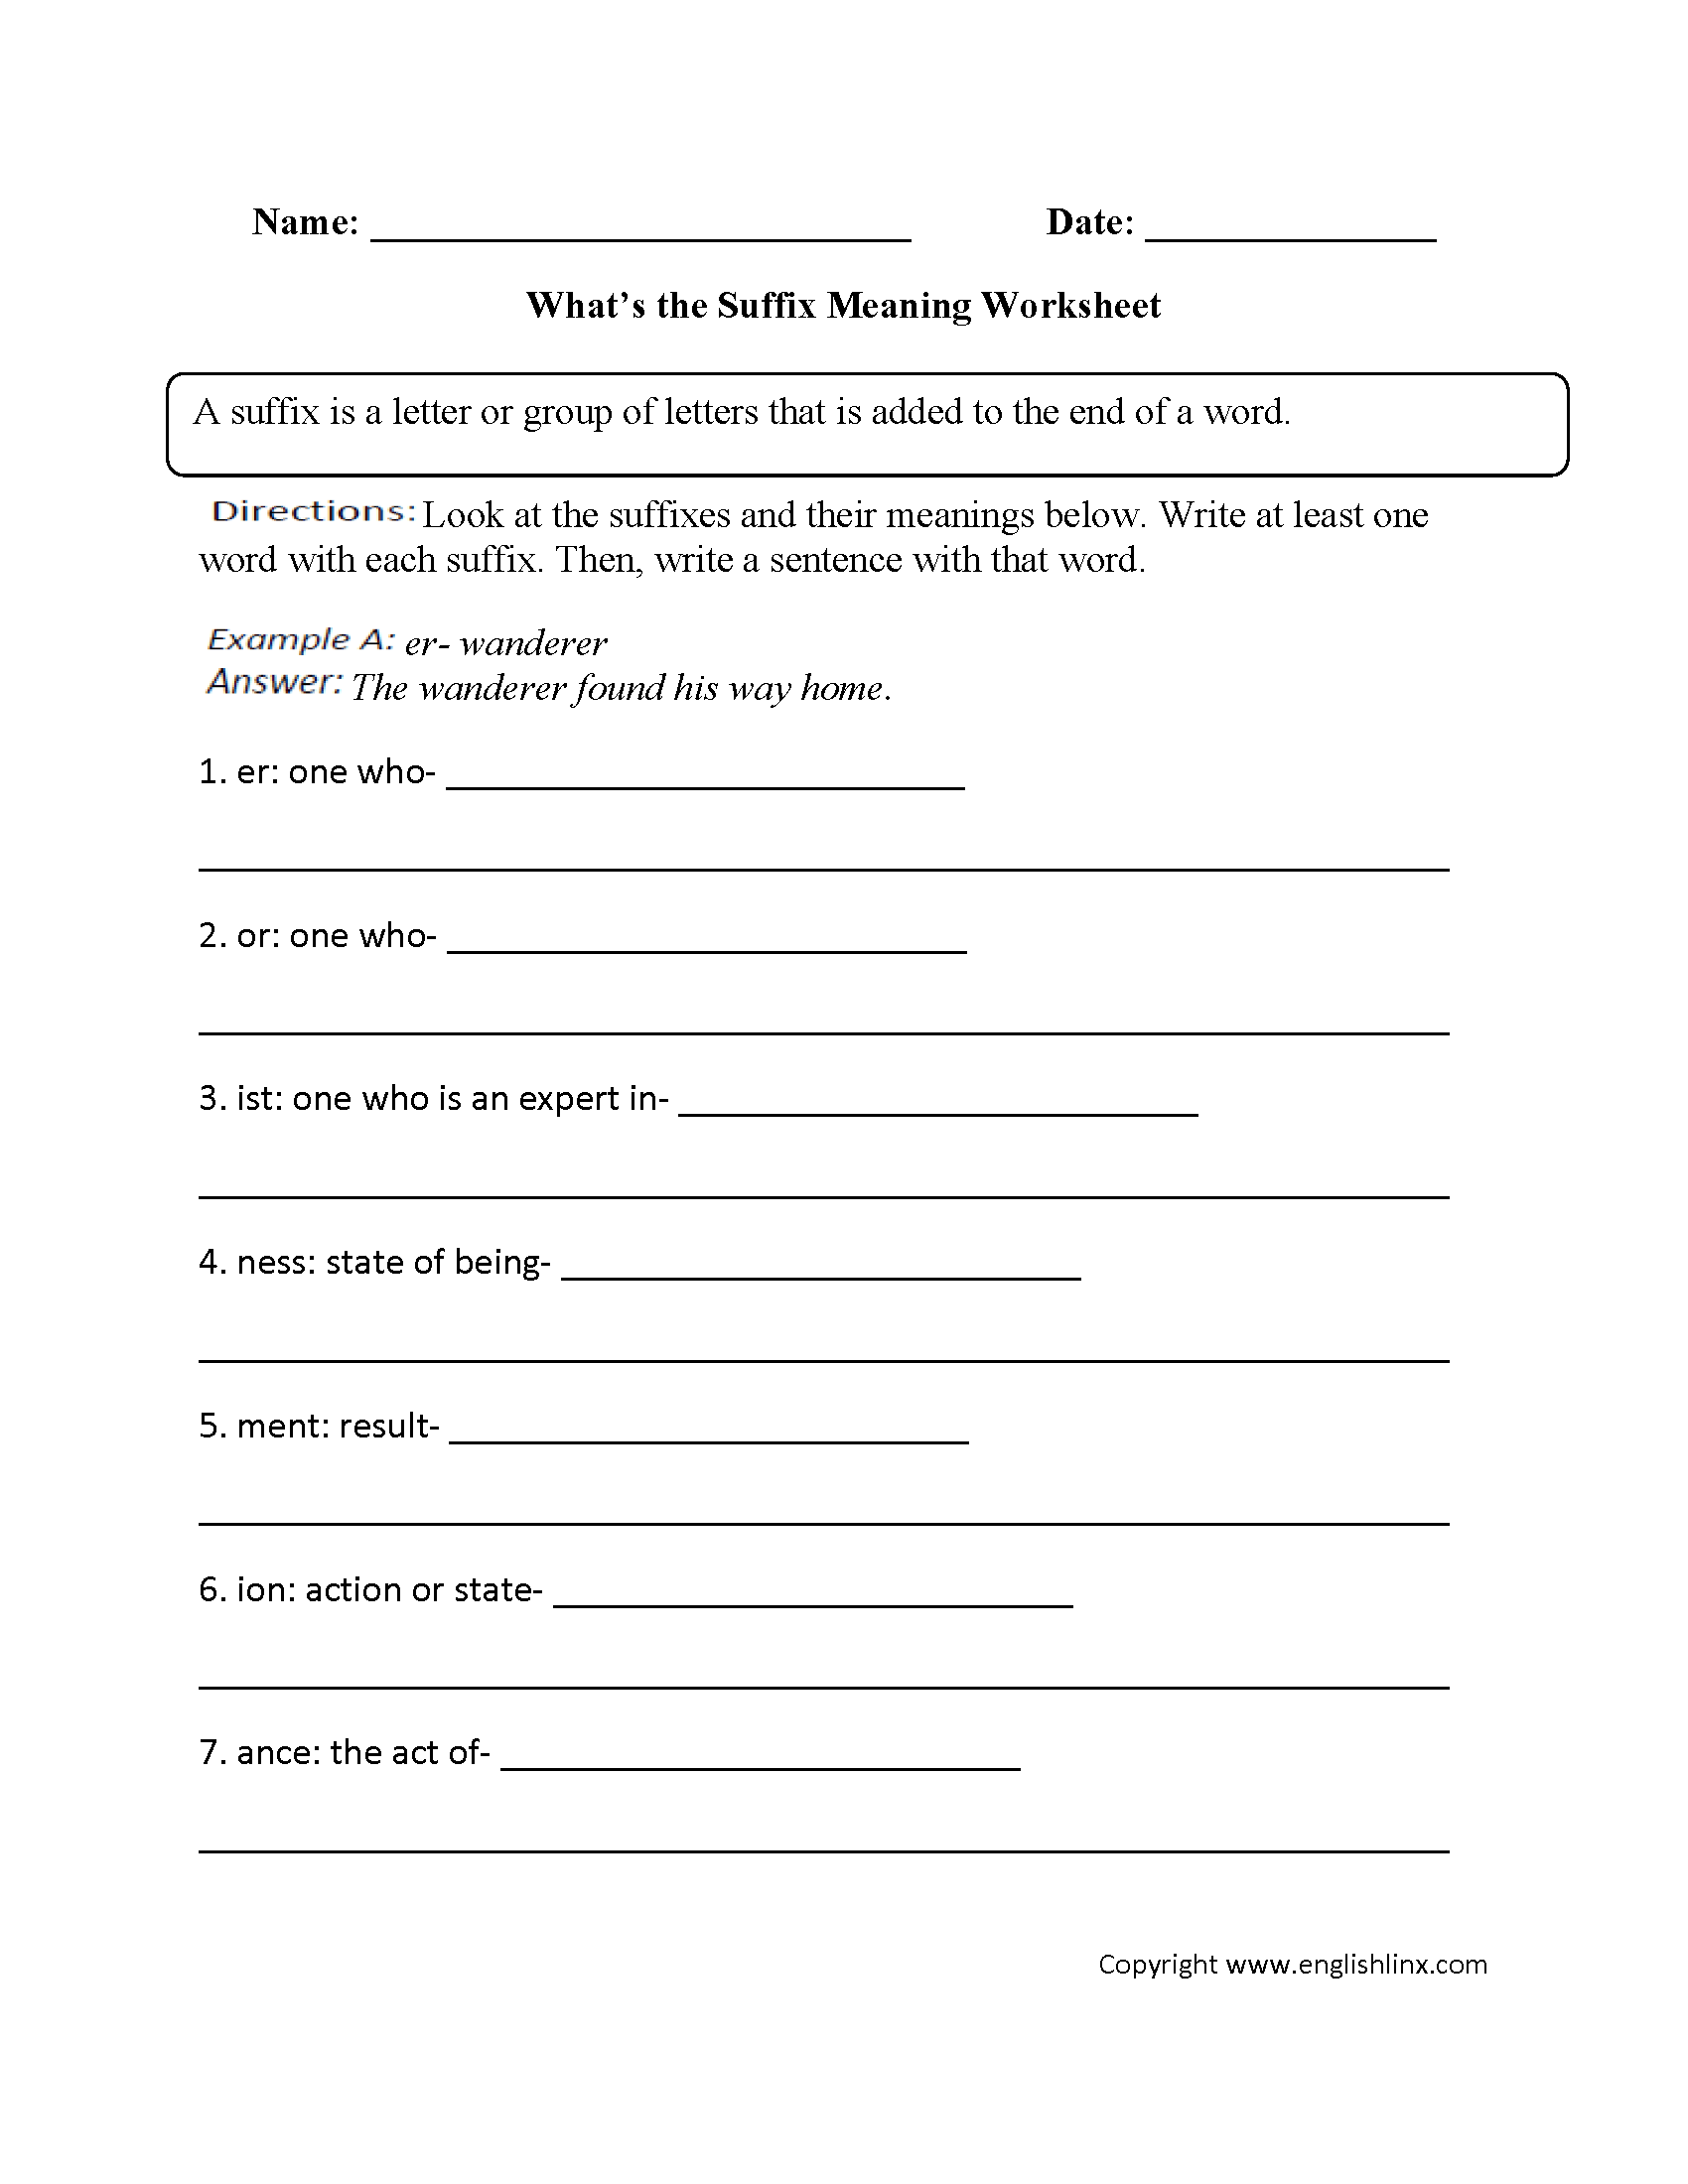 vocabulary-worksheets-suffix-worksheets